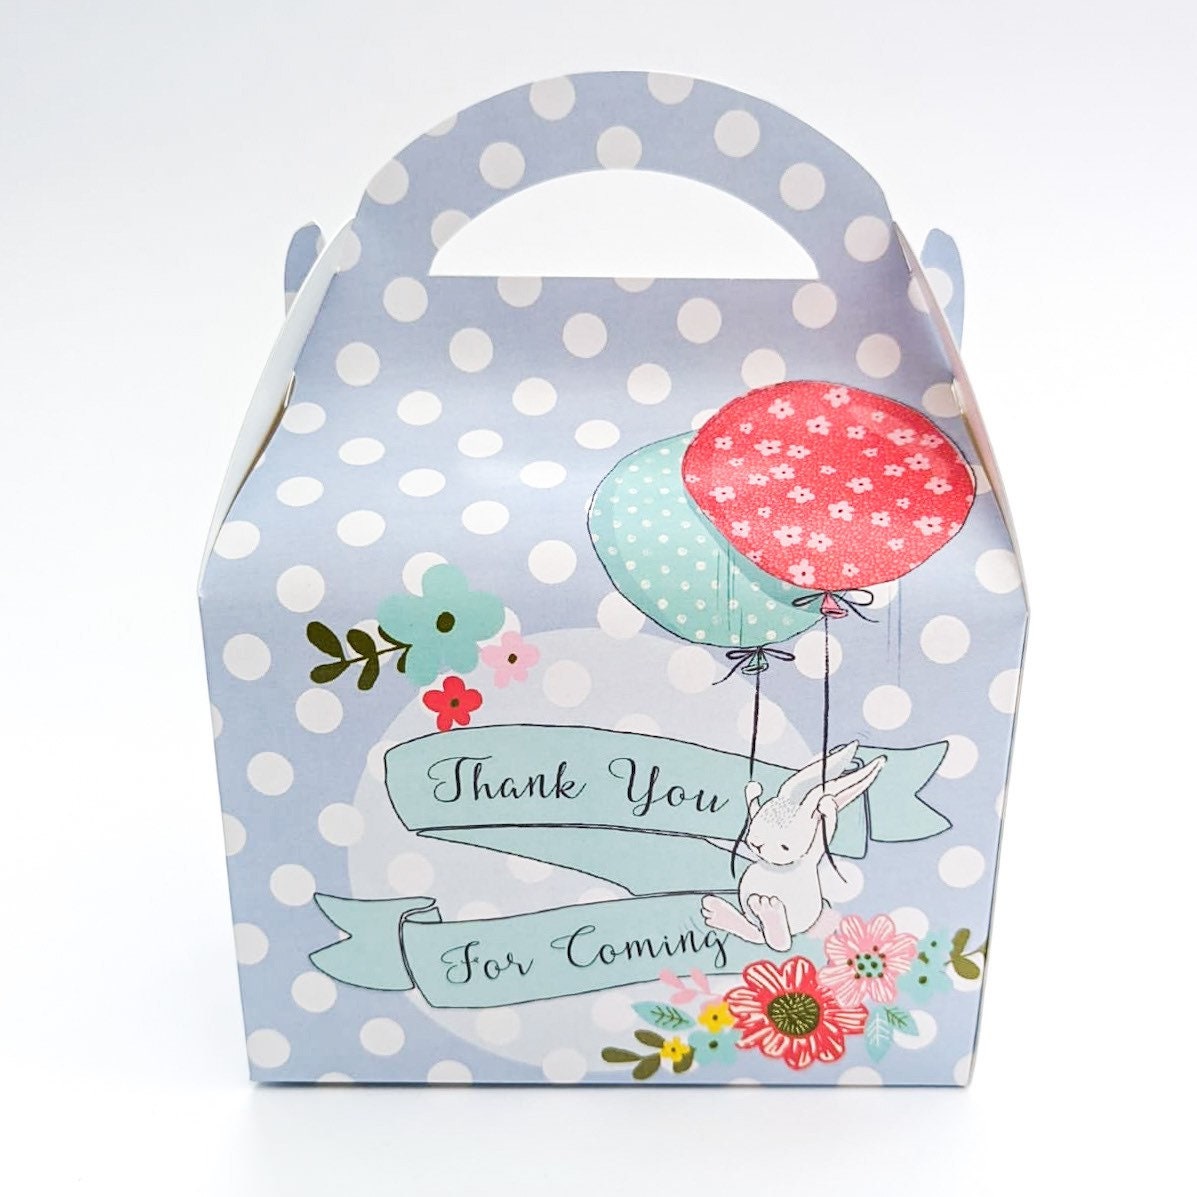 Bunny Rabbit Floral balloons Personalised Children’s Party Box Gift Bag Favour